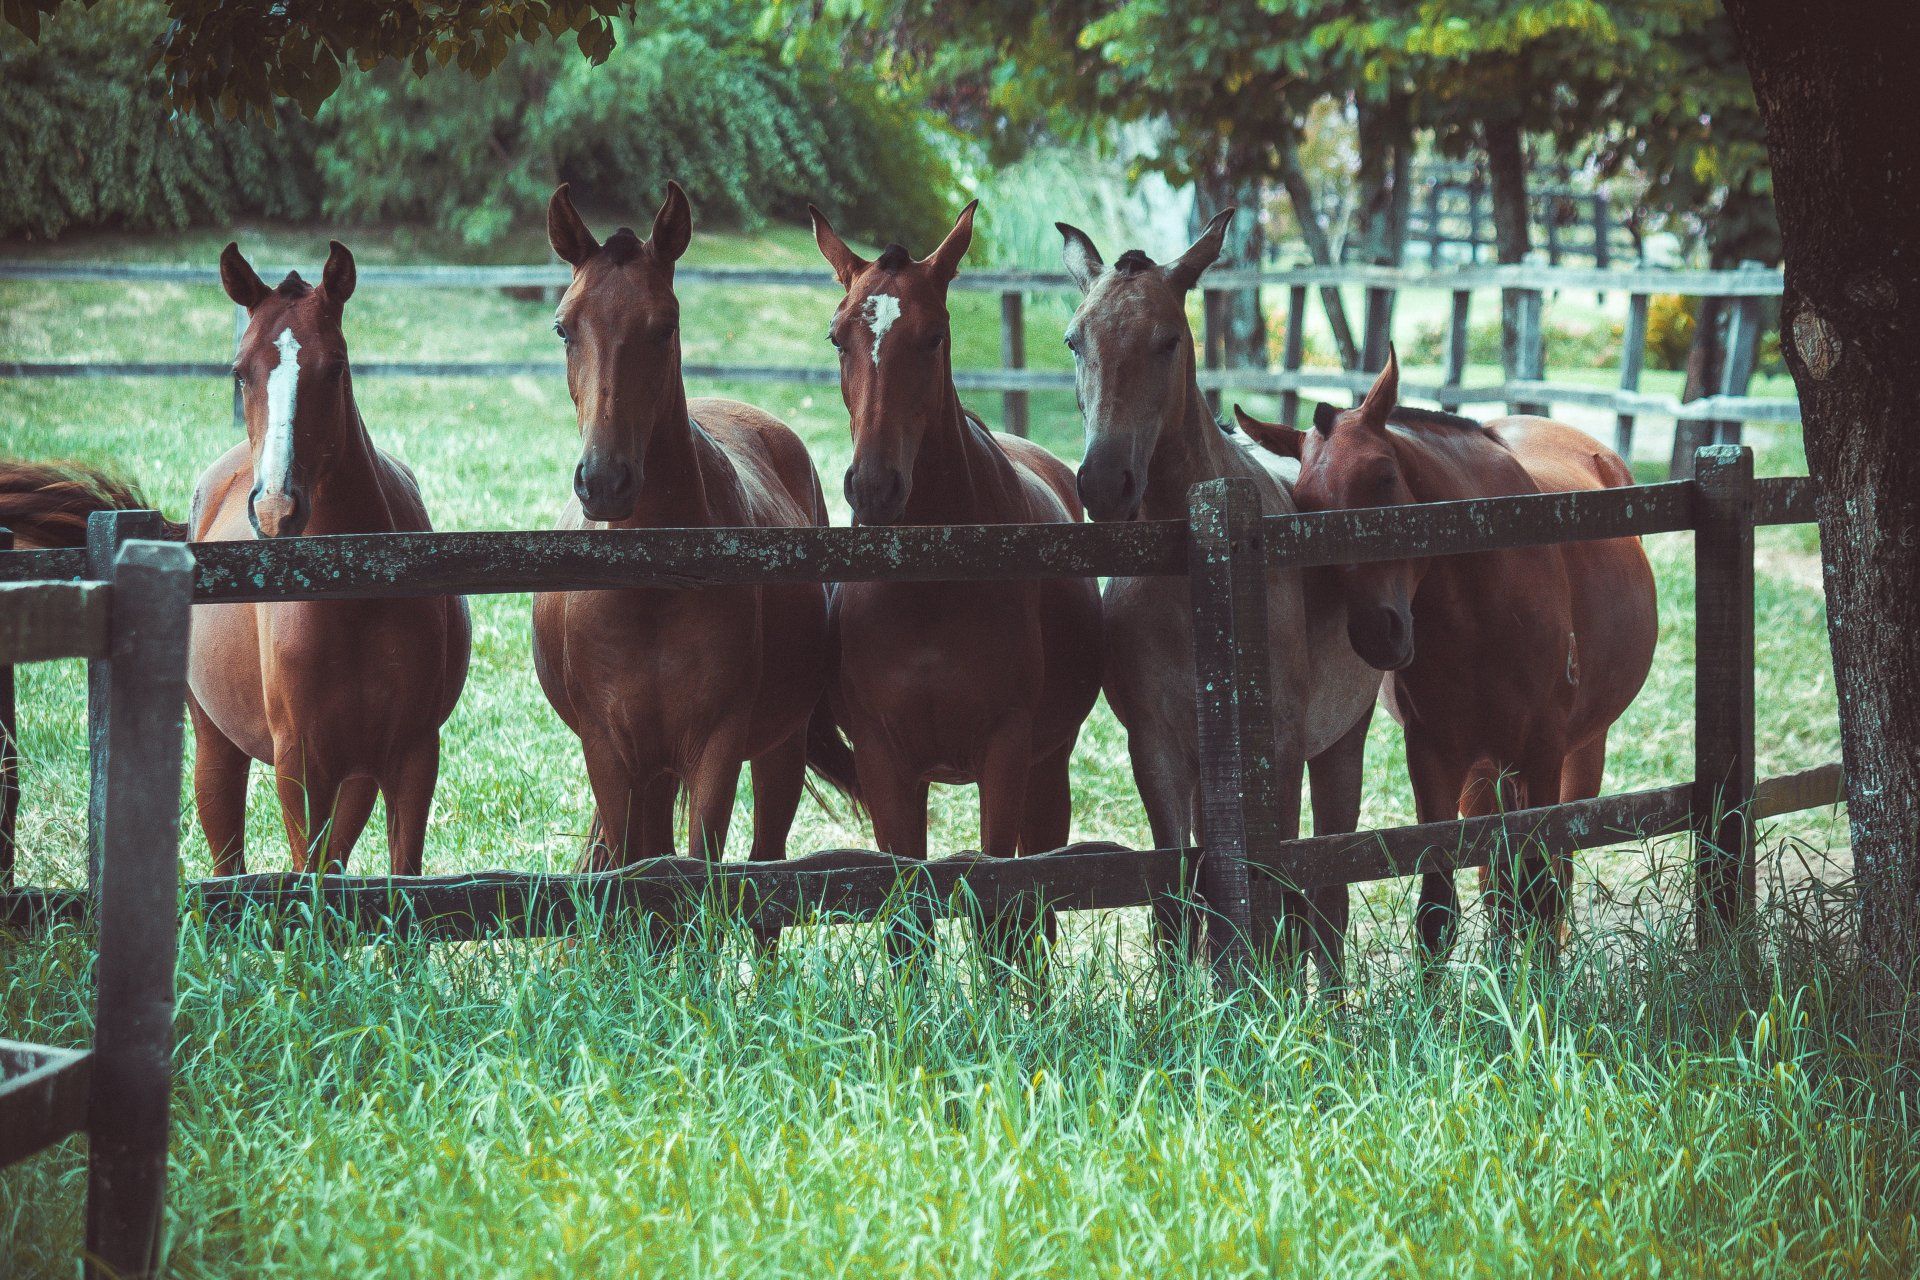 a group of horses standing behind a wooden fence